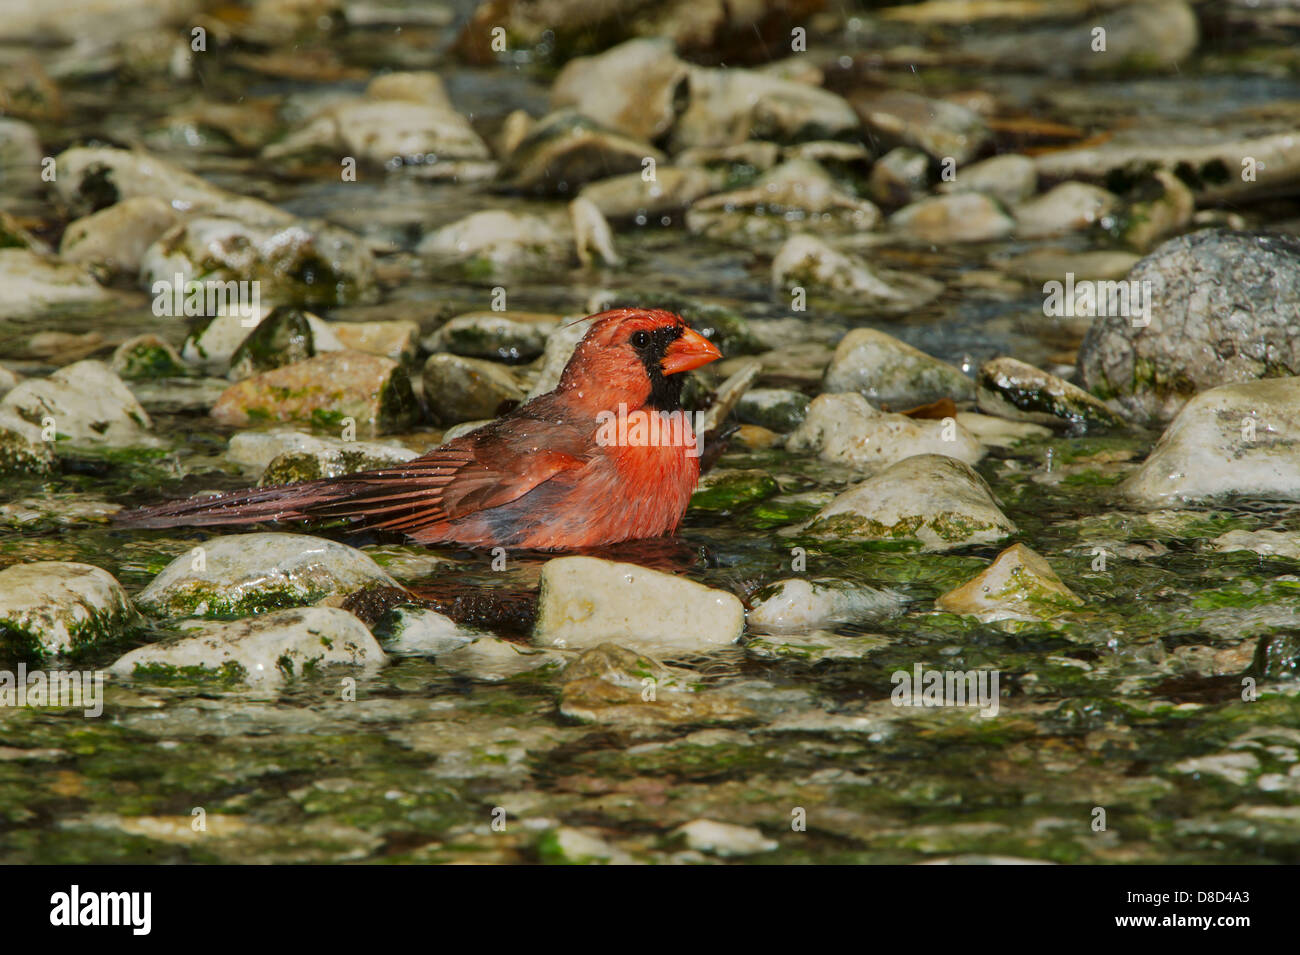 Male Northern cardinal bird bathing in a rocky puddle, Christoval, Texas, USA Stock Photo